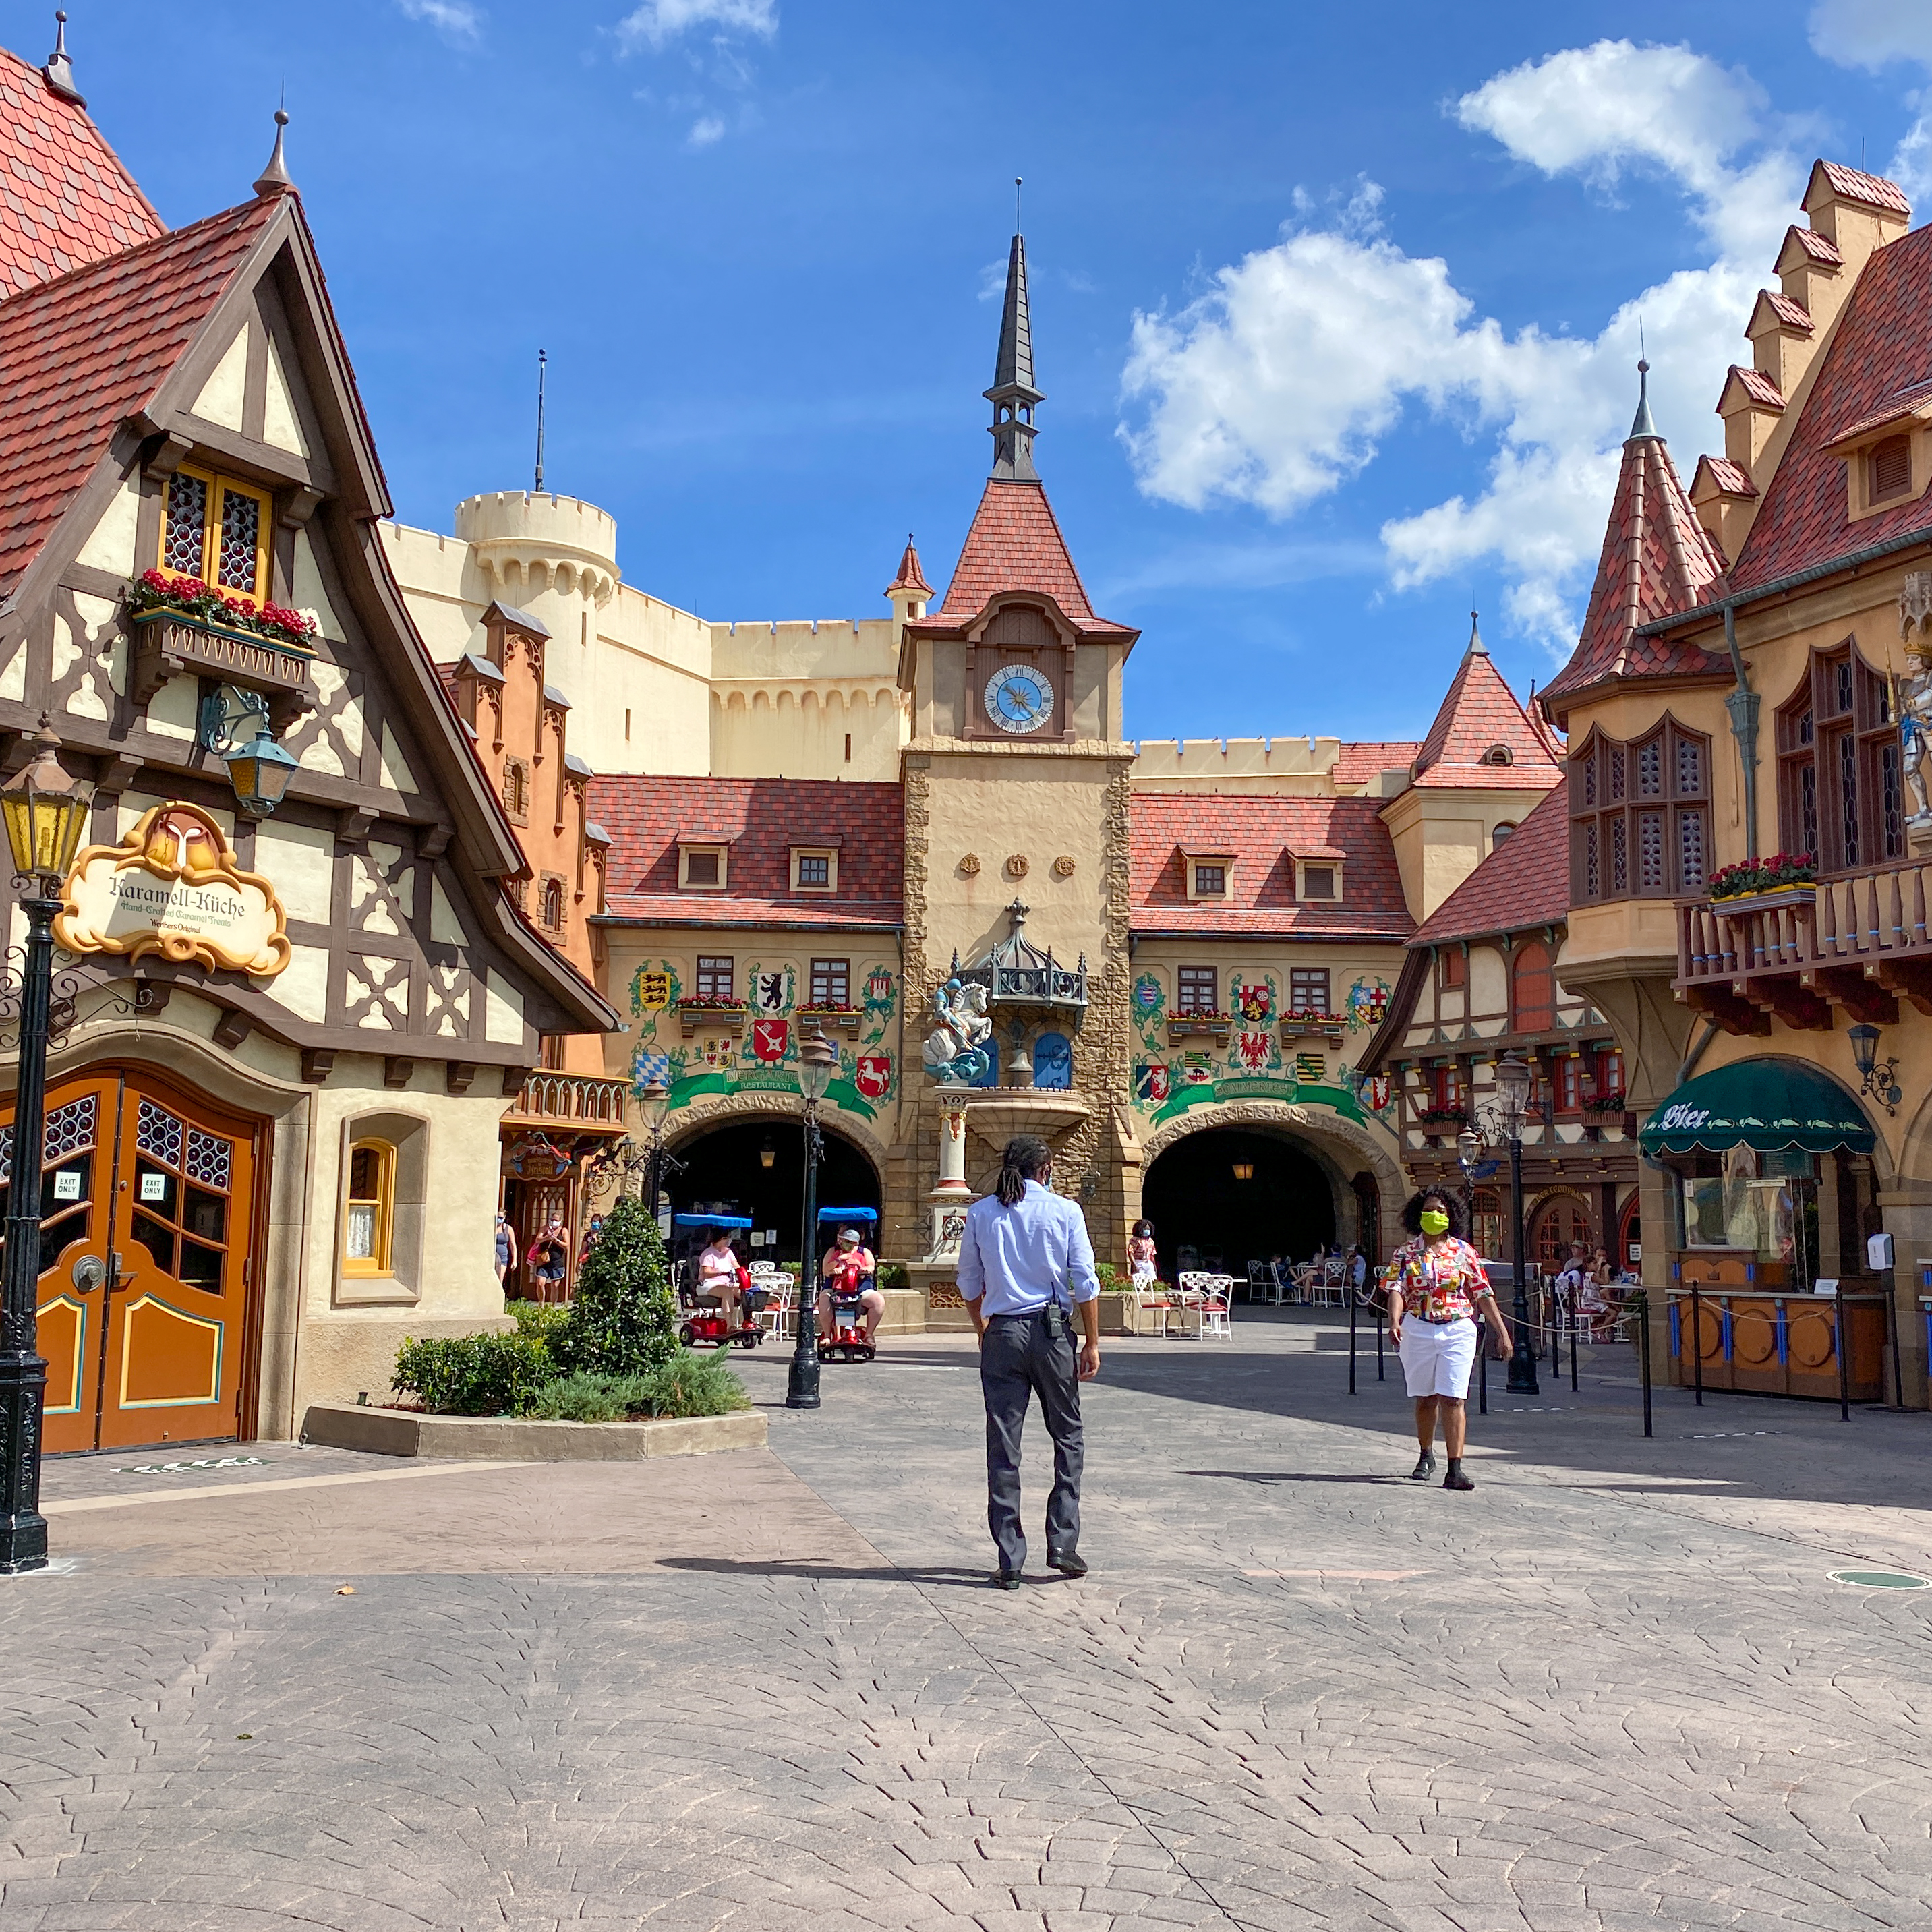 New Epic Adventures at the EPCOT International Food and Wine Festival - Germany Pavilion at EPCOT